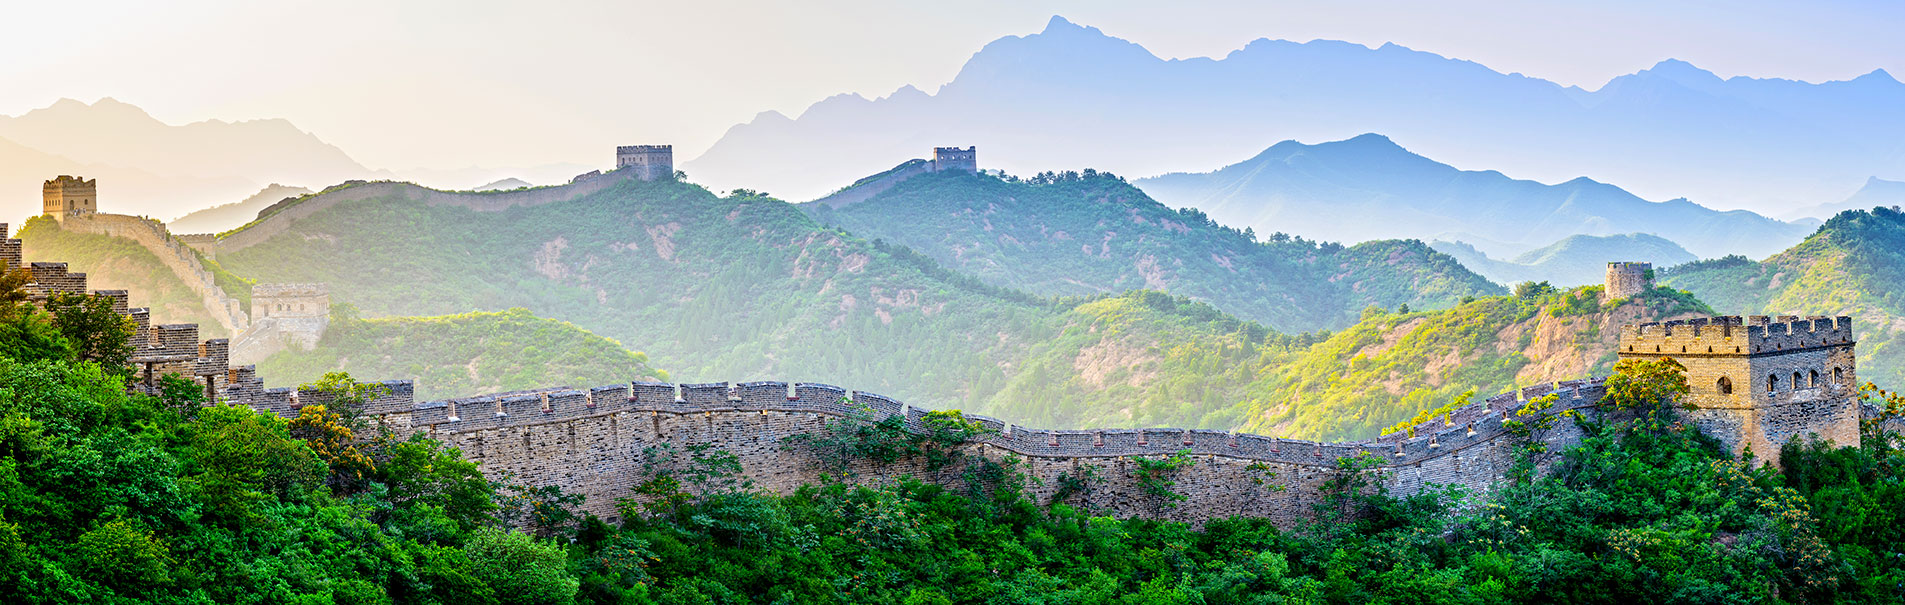 How far is the great wall of china from beijing Great Wall Of China Tours Group Private Beijing Great Wall Trips